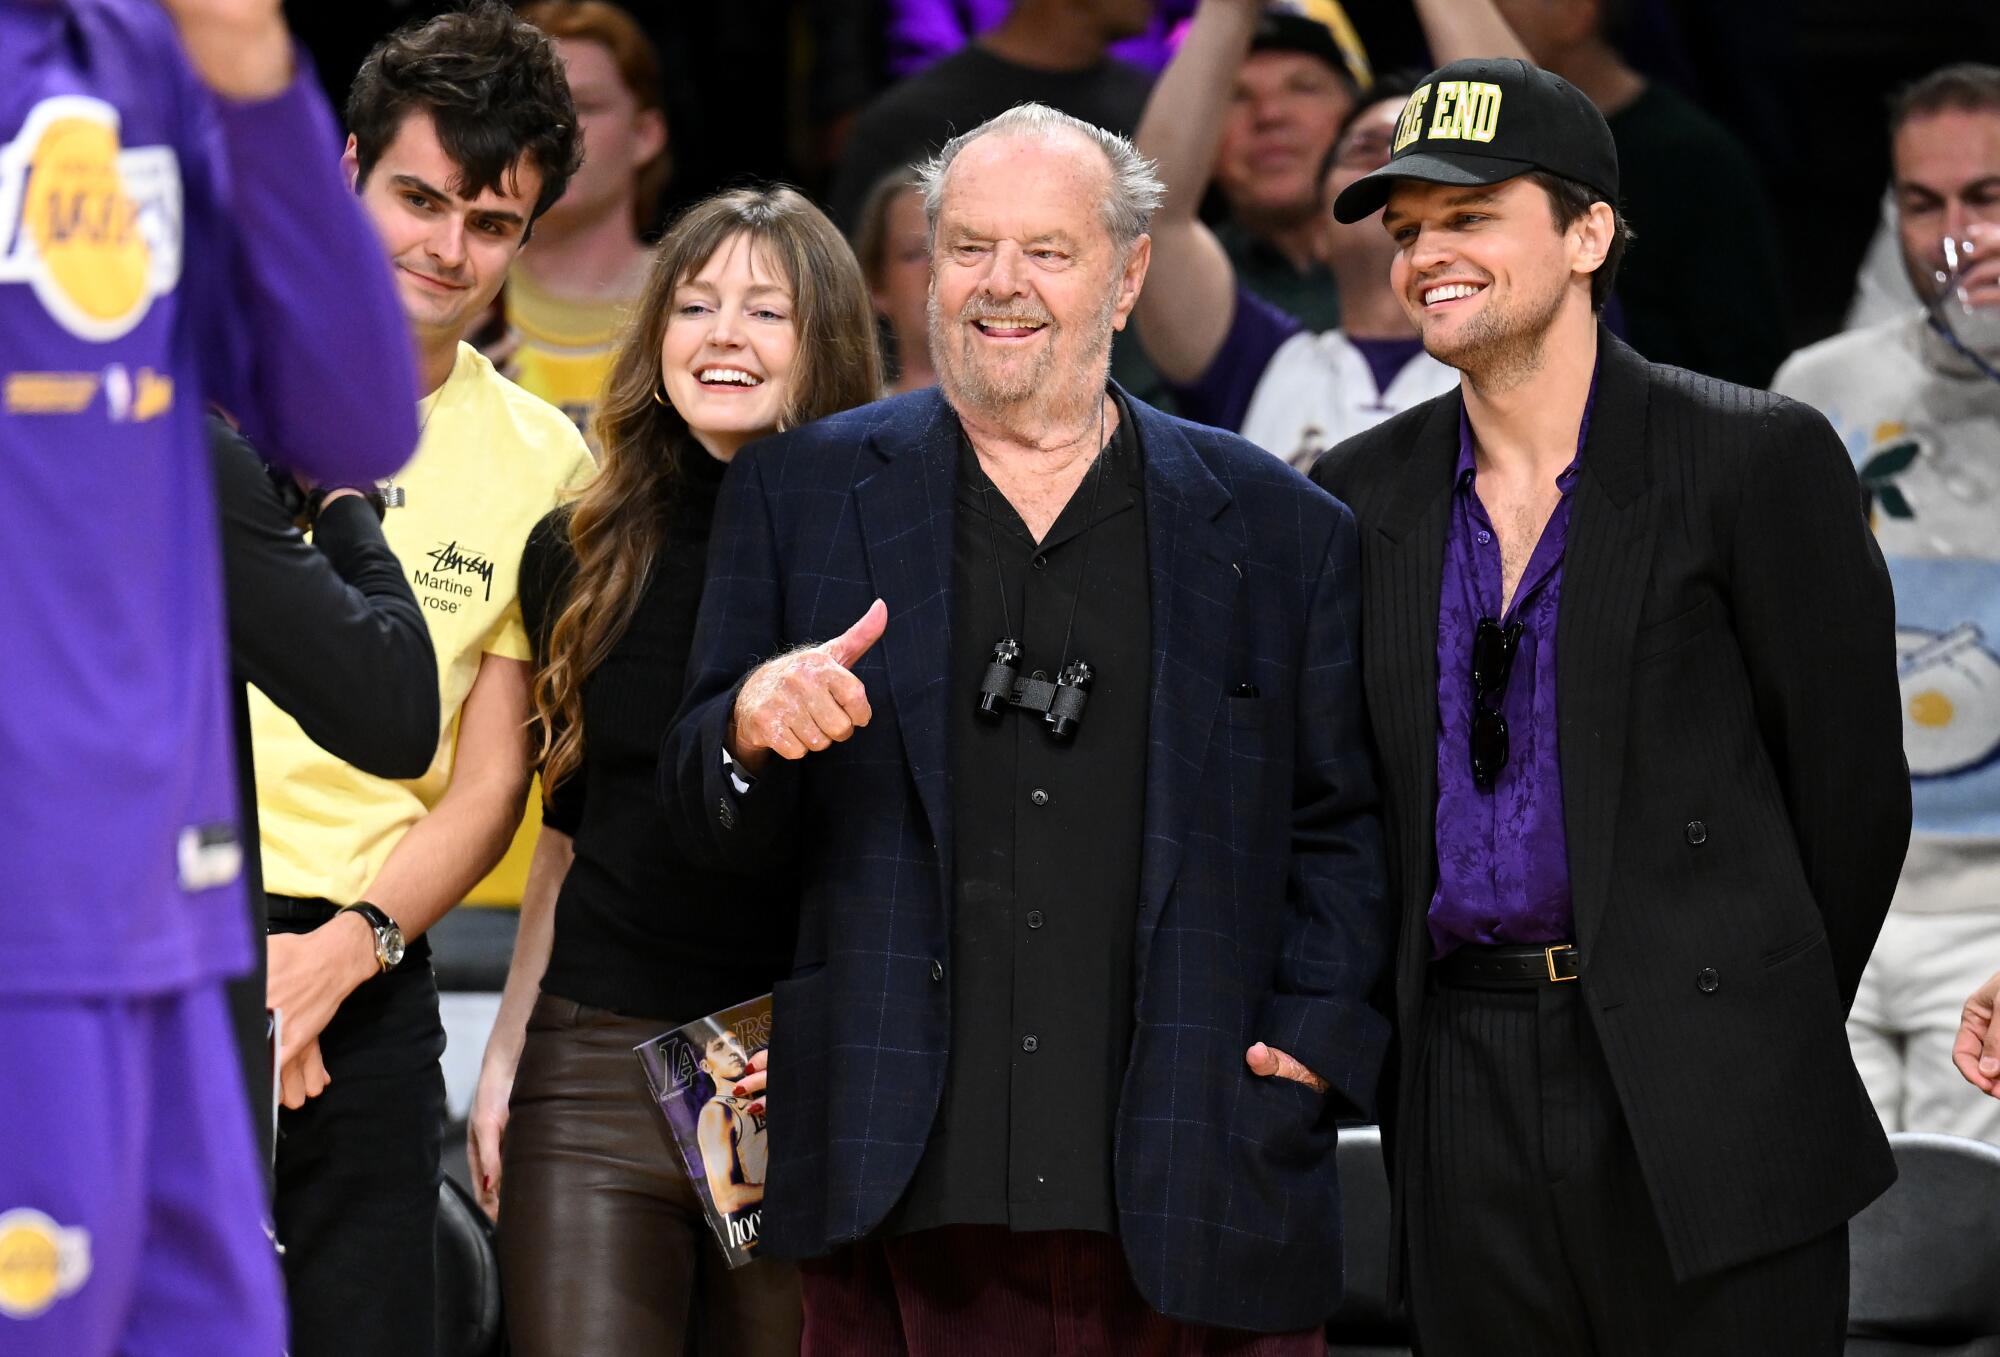 Actor Jack Nicholson smiles before a Lakers game.